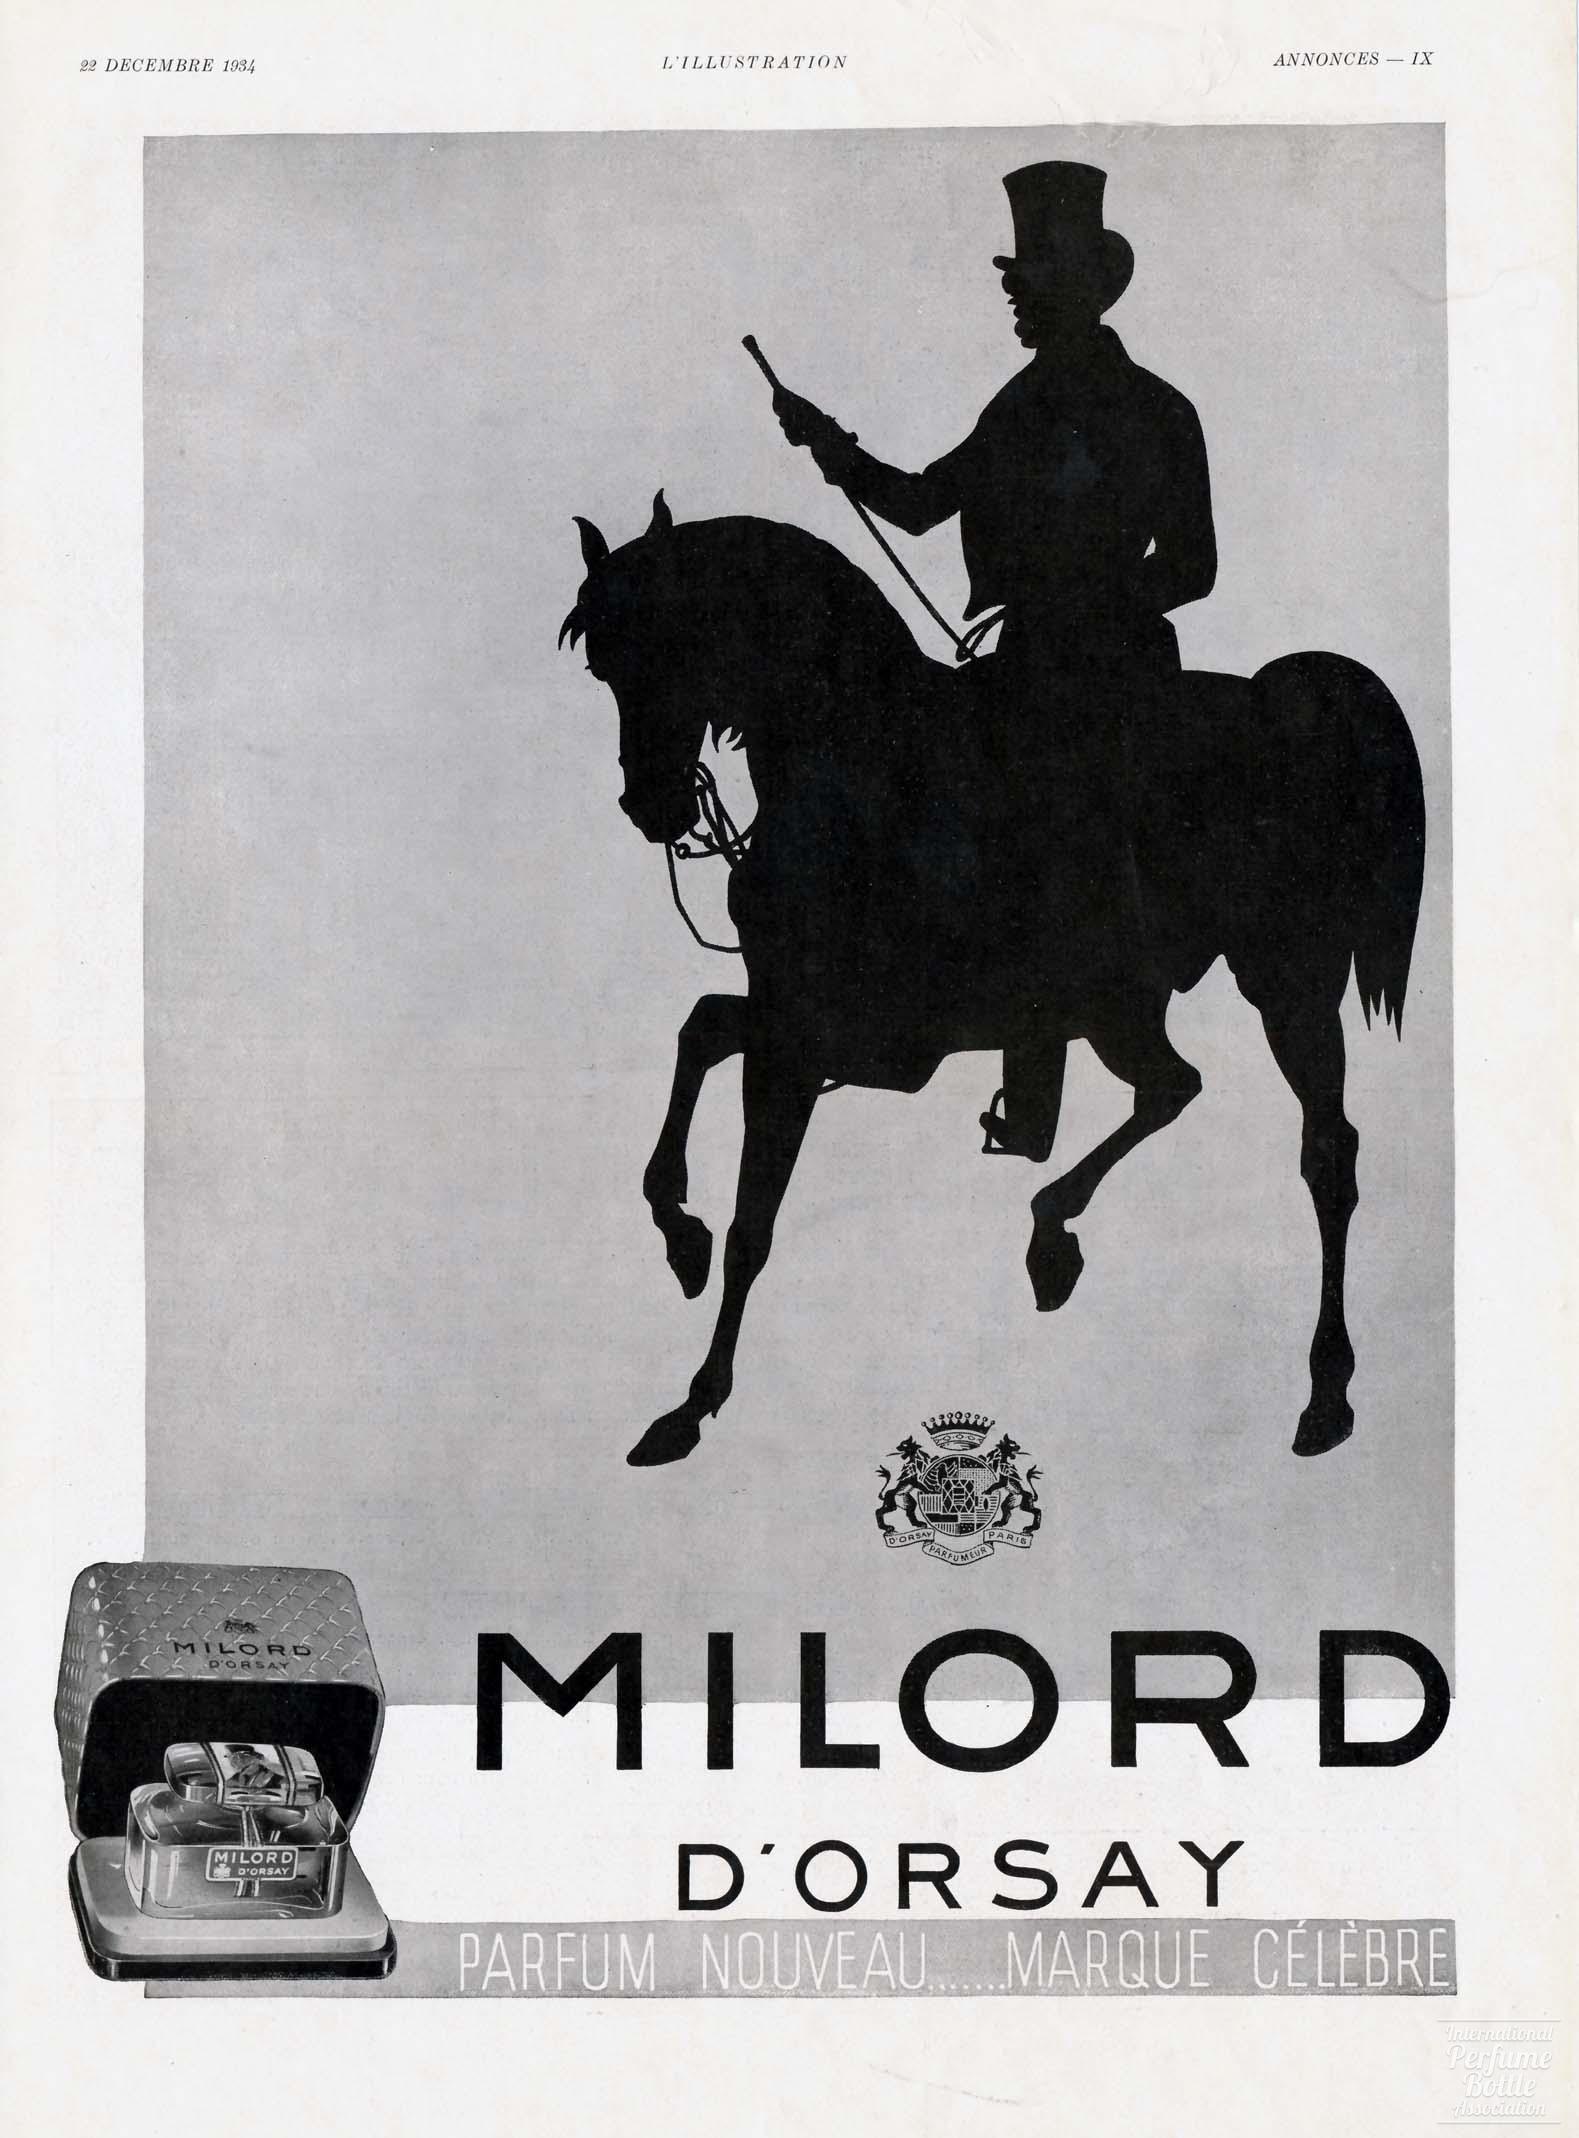 "Milord" by D'Orsay Advertisement - 1934